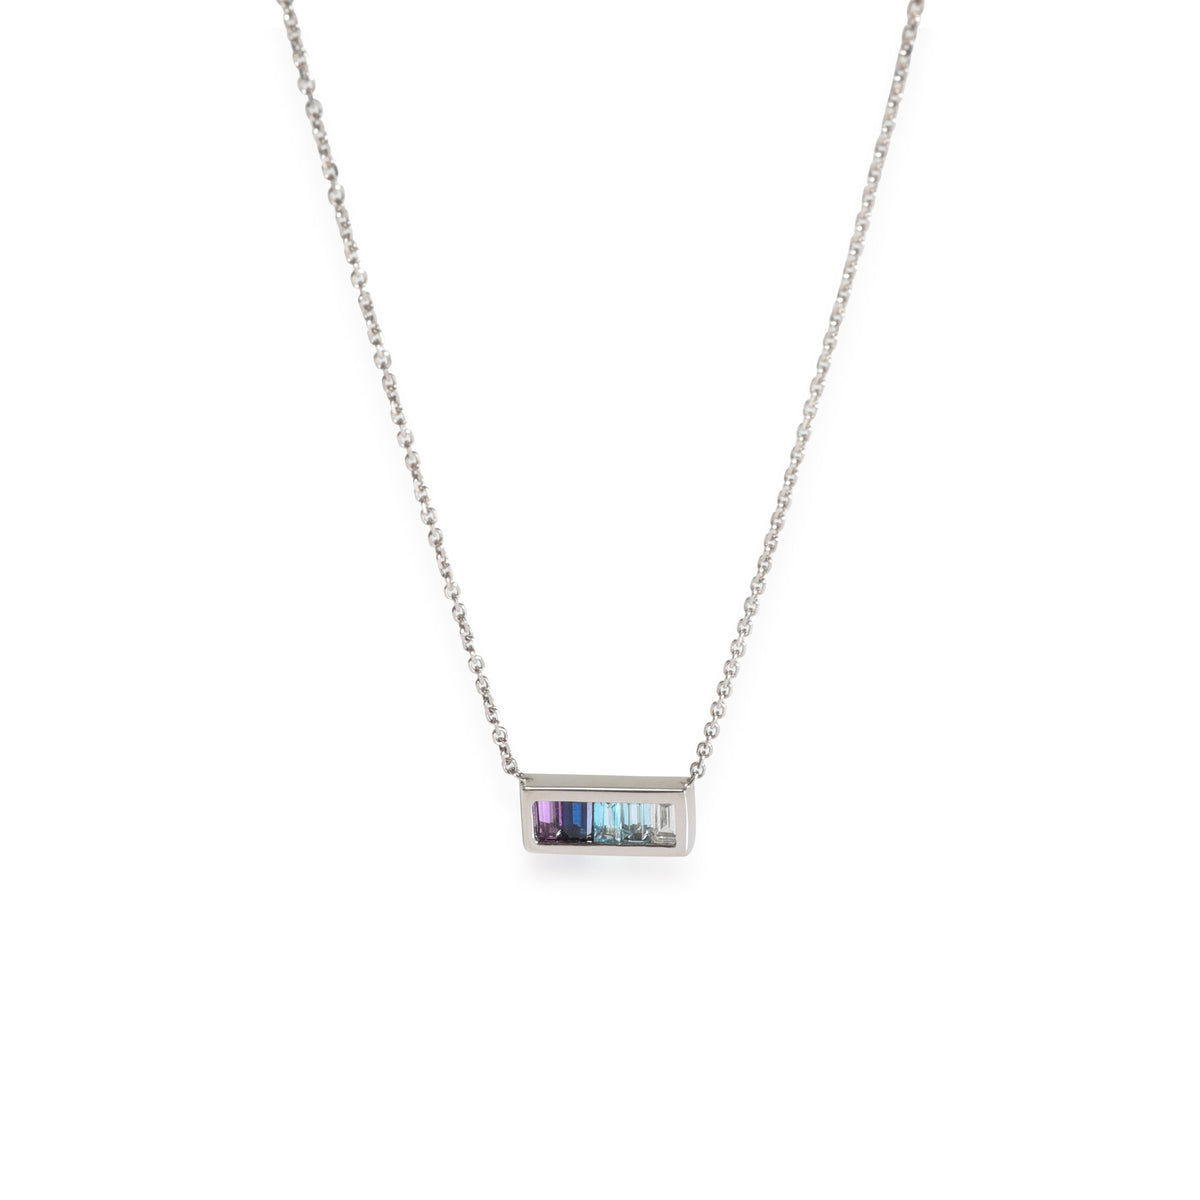 My Story Aria Rainbow Bar Necklace in 14KT White Gold